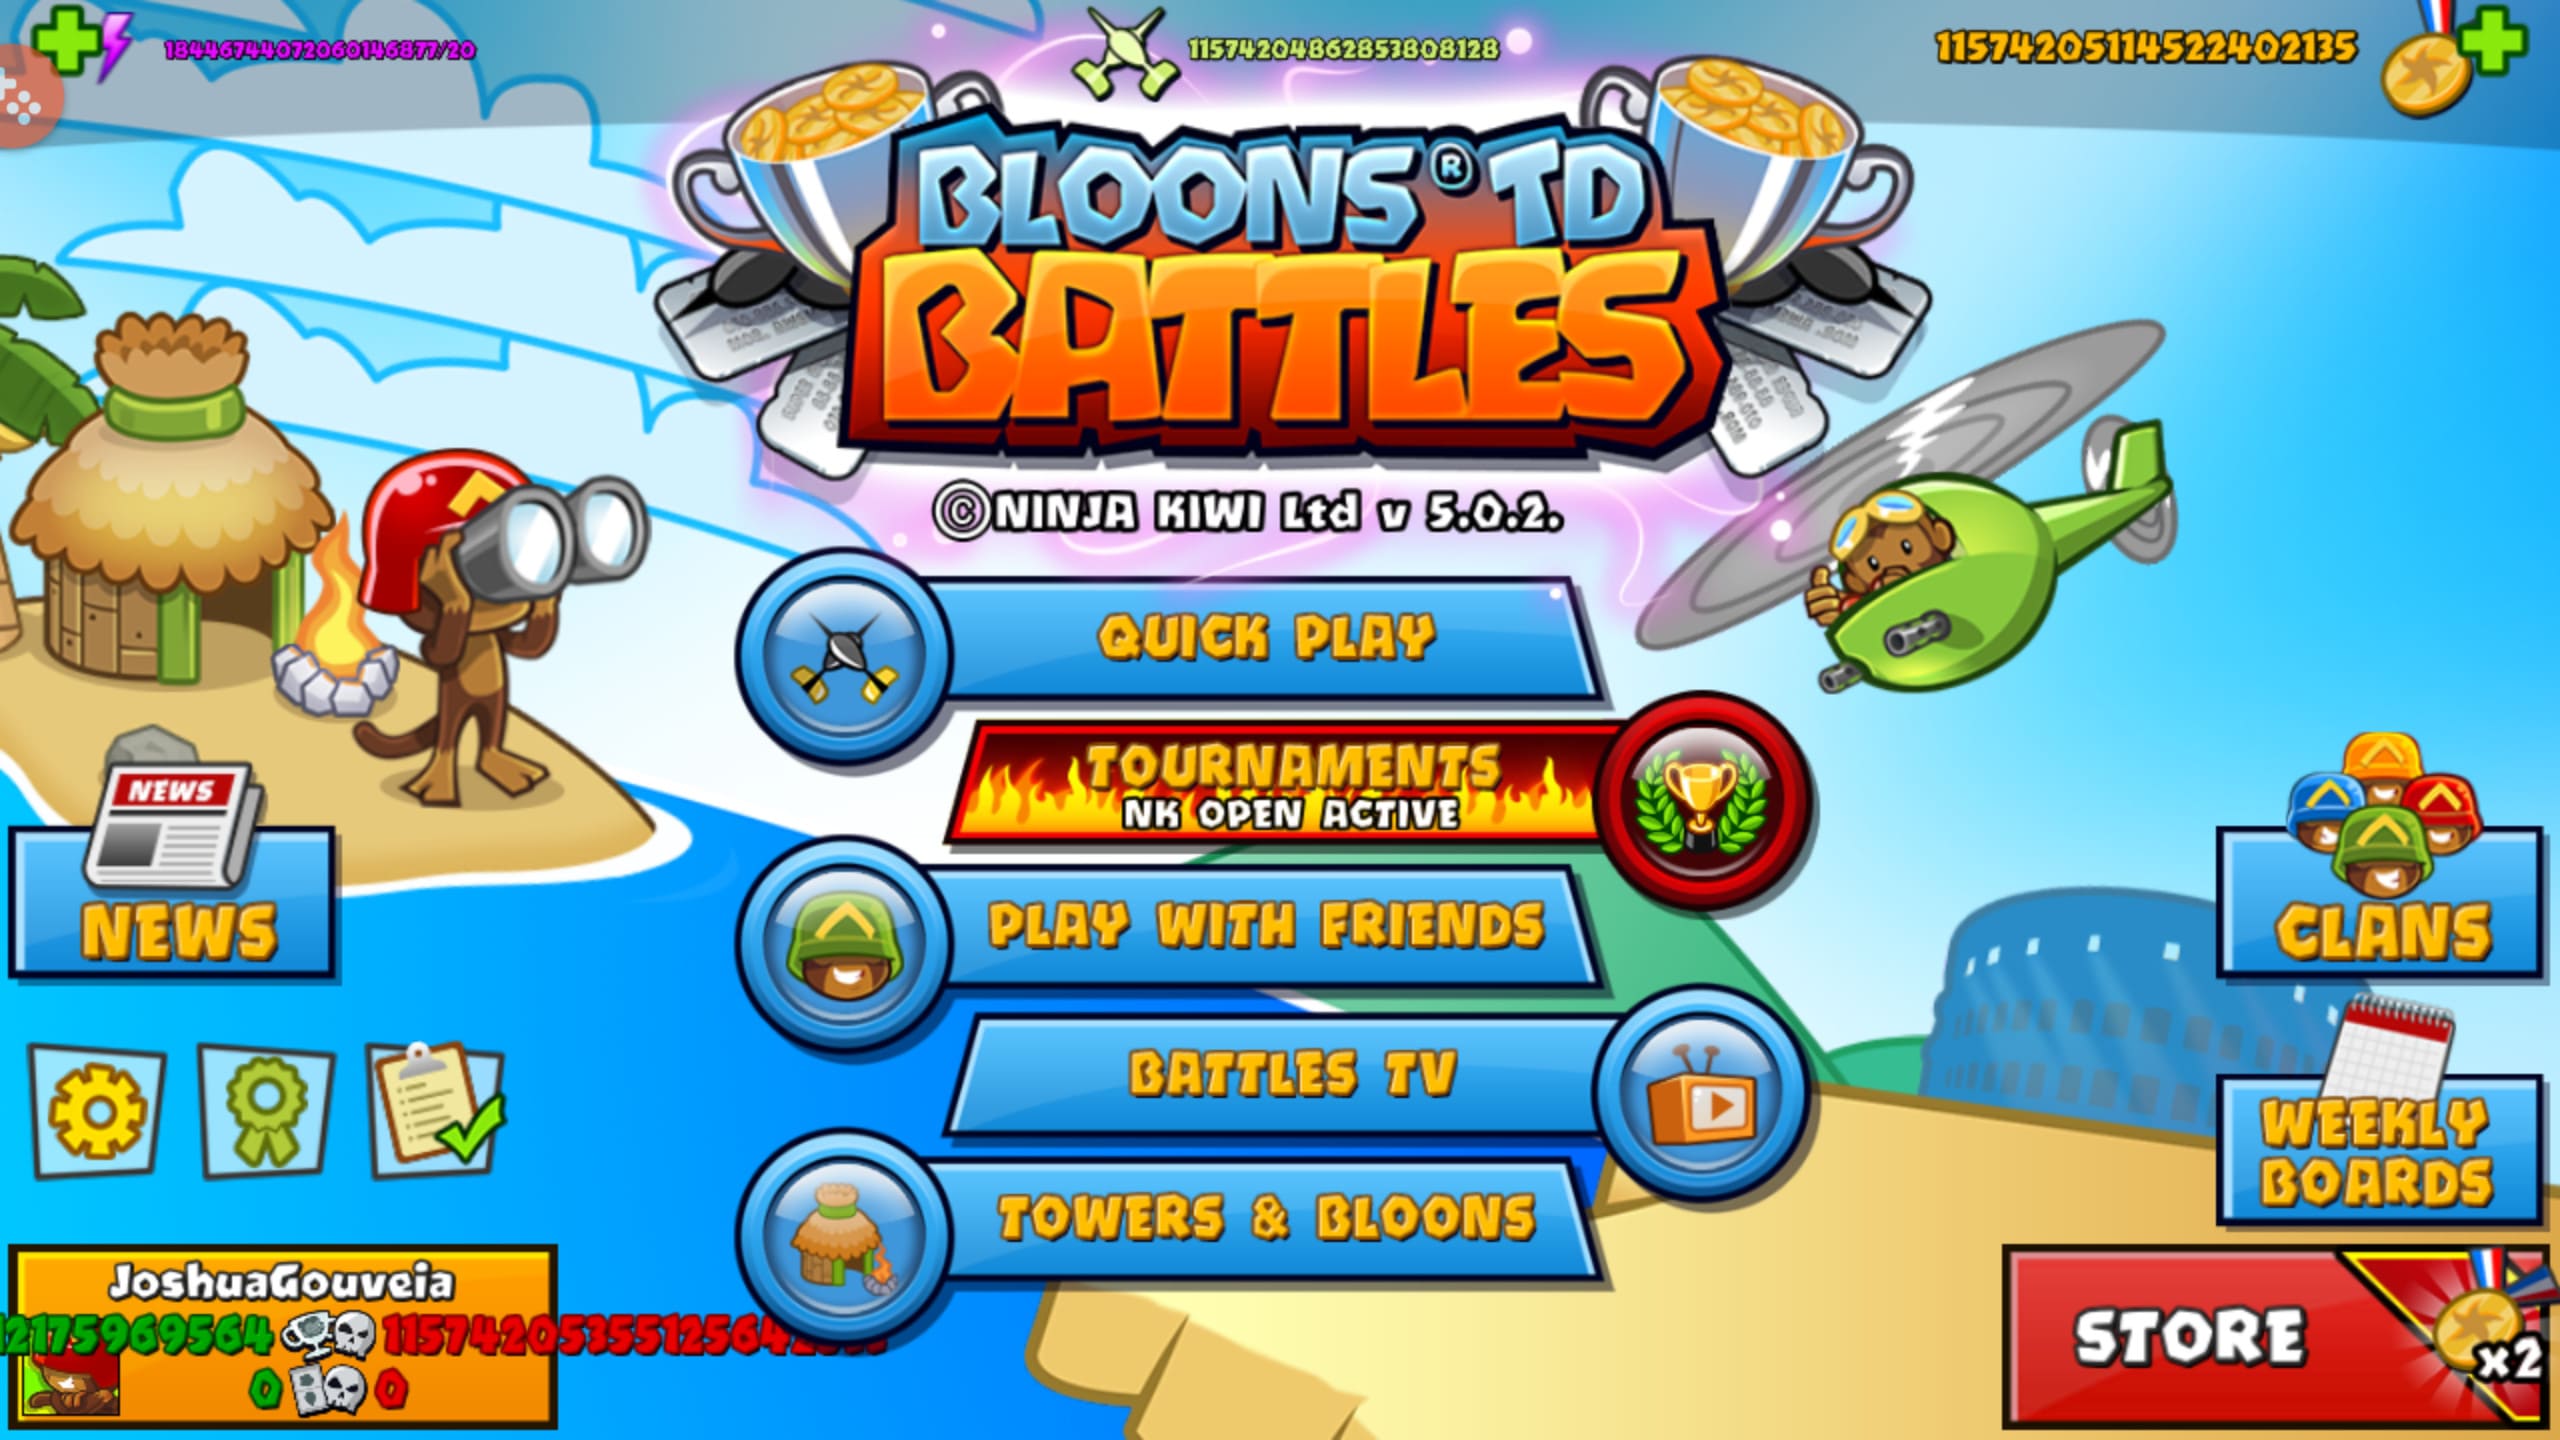 Give You A Bloons Td Battles Modded Account By Joshuagouveia